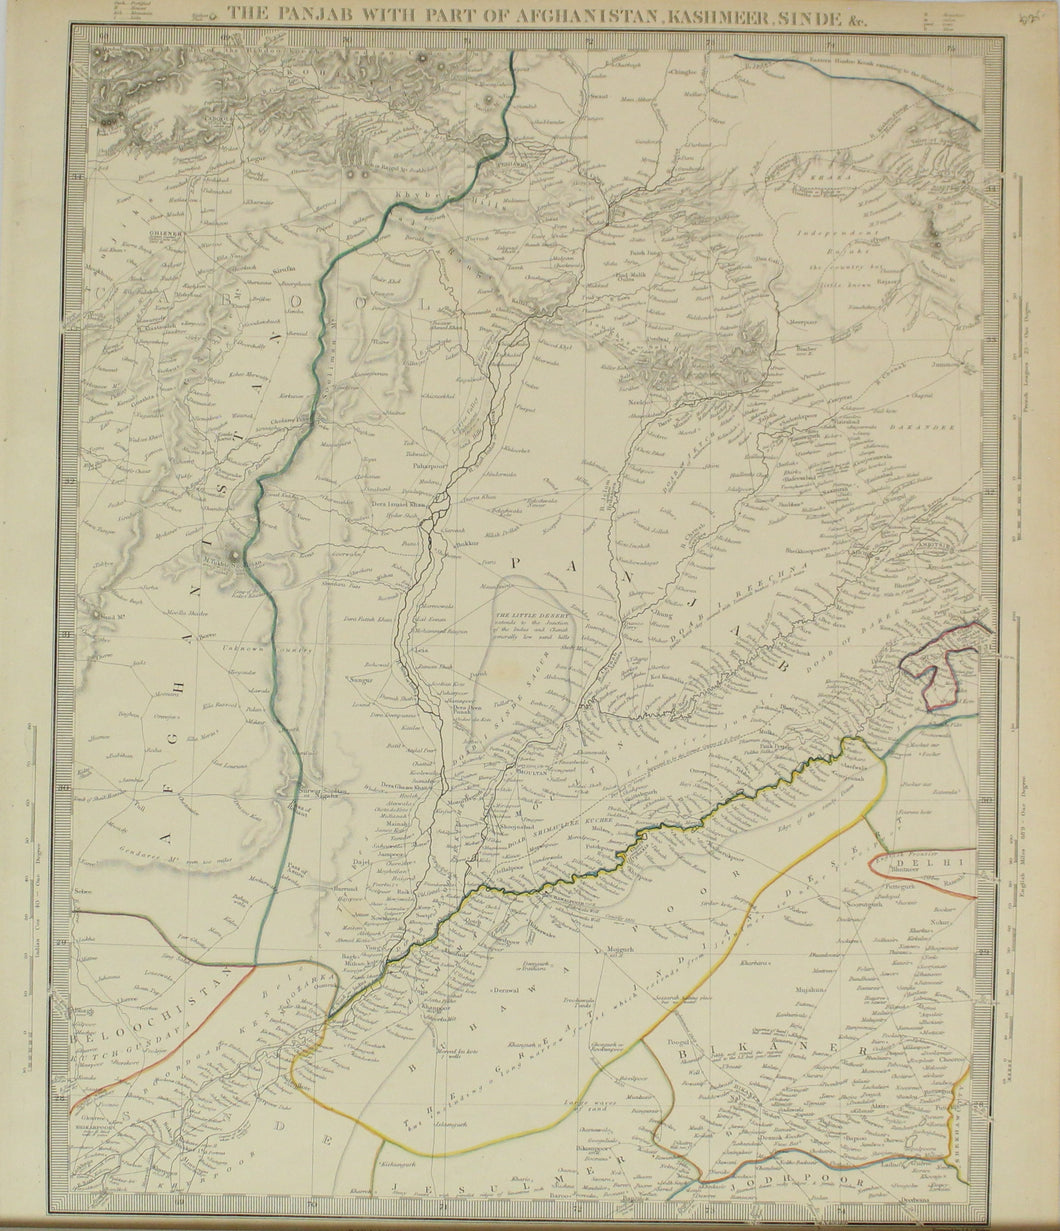 Map, The Punjab with Part of Afghanistan, Kashmeer and Sinde, Chapman and Hall, c1839